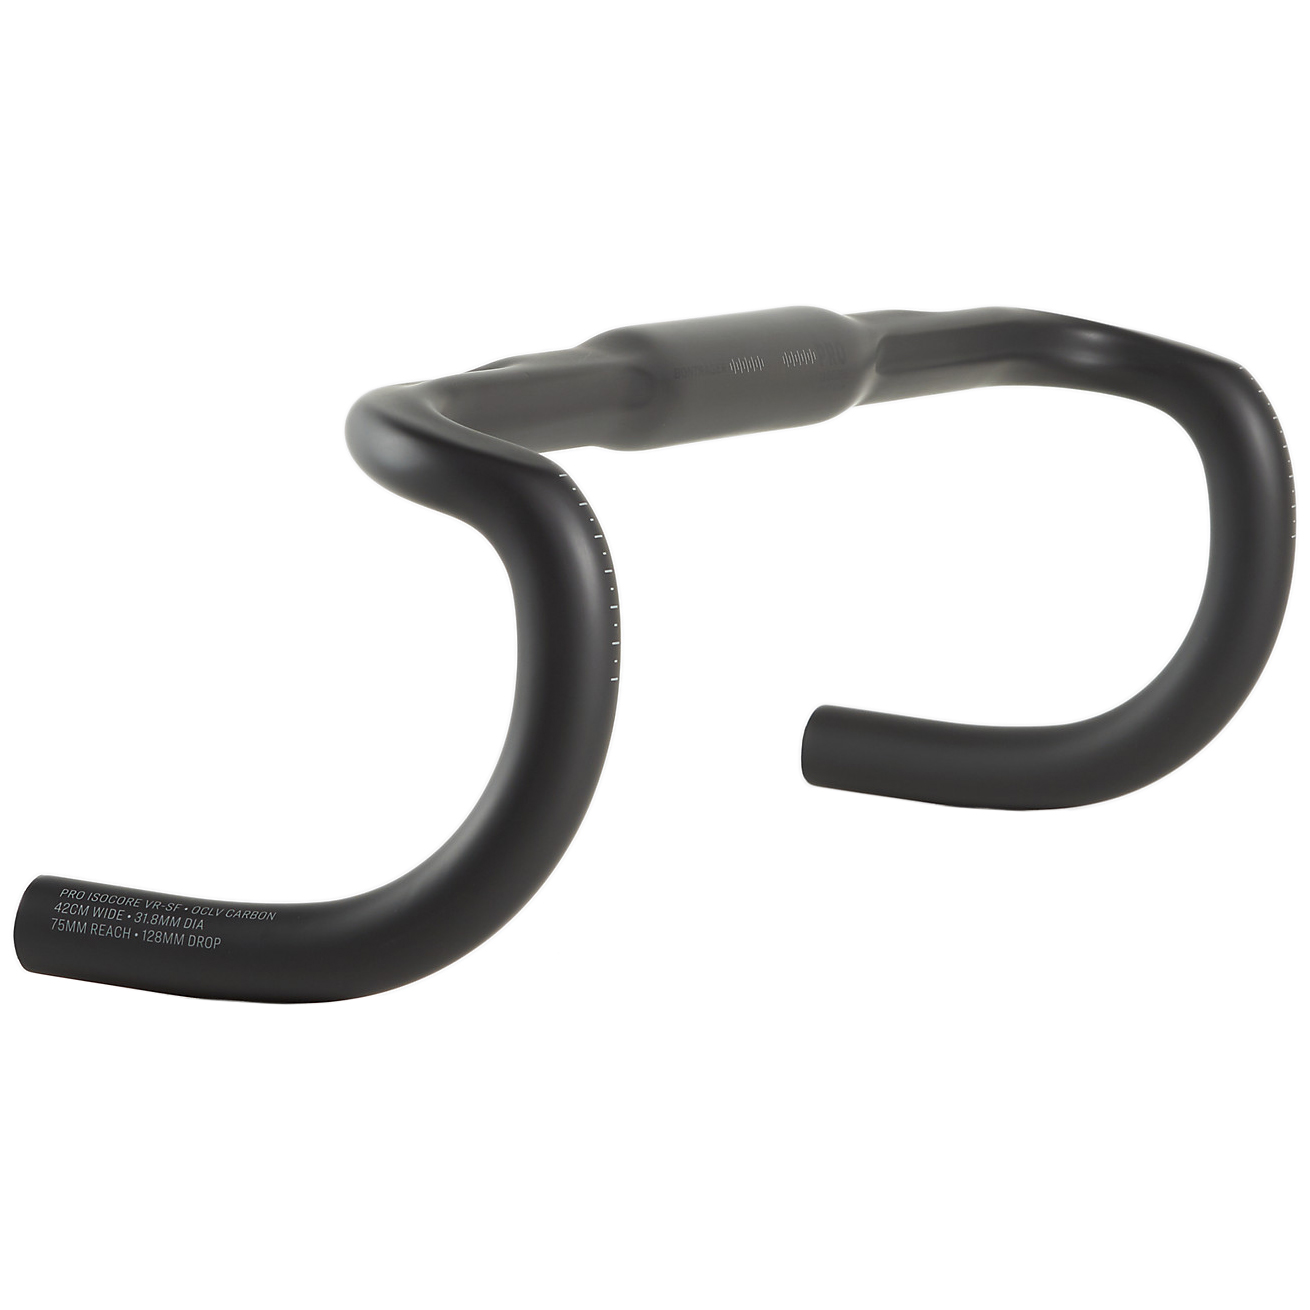 Picture of Bontrager Pro IsoCore VR-SF Road Bar - Black